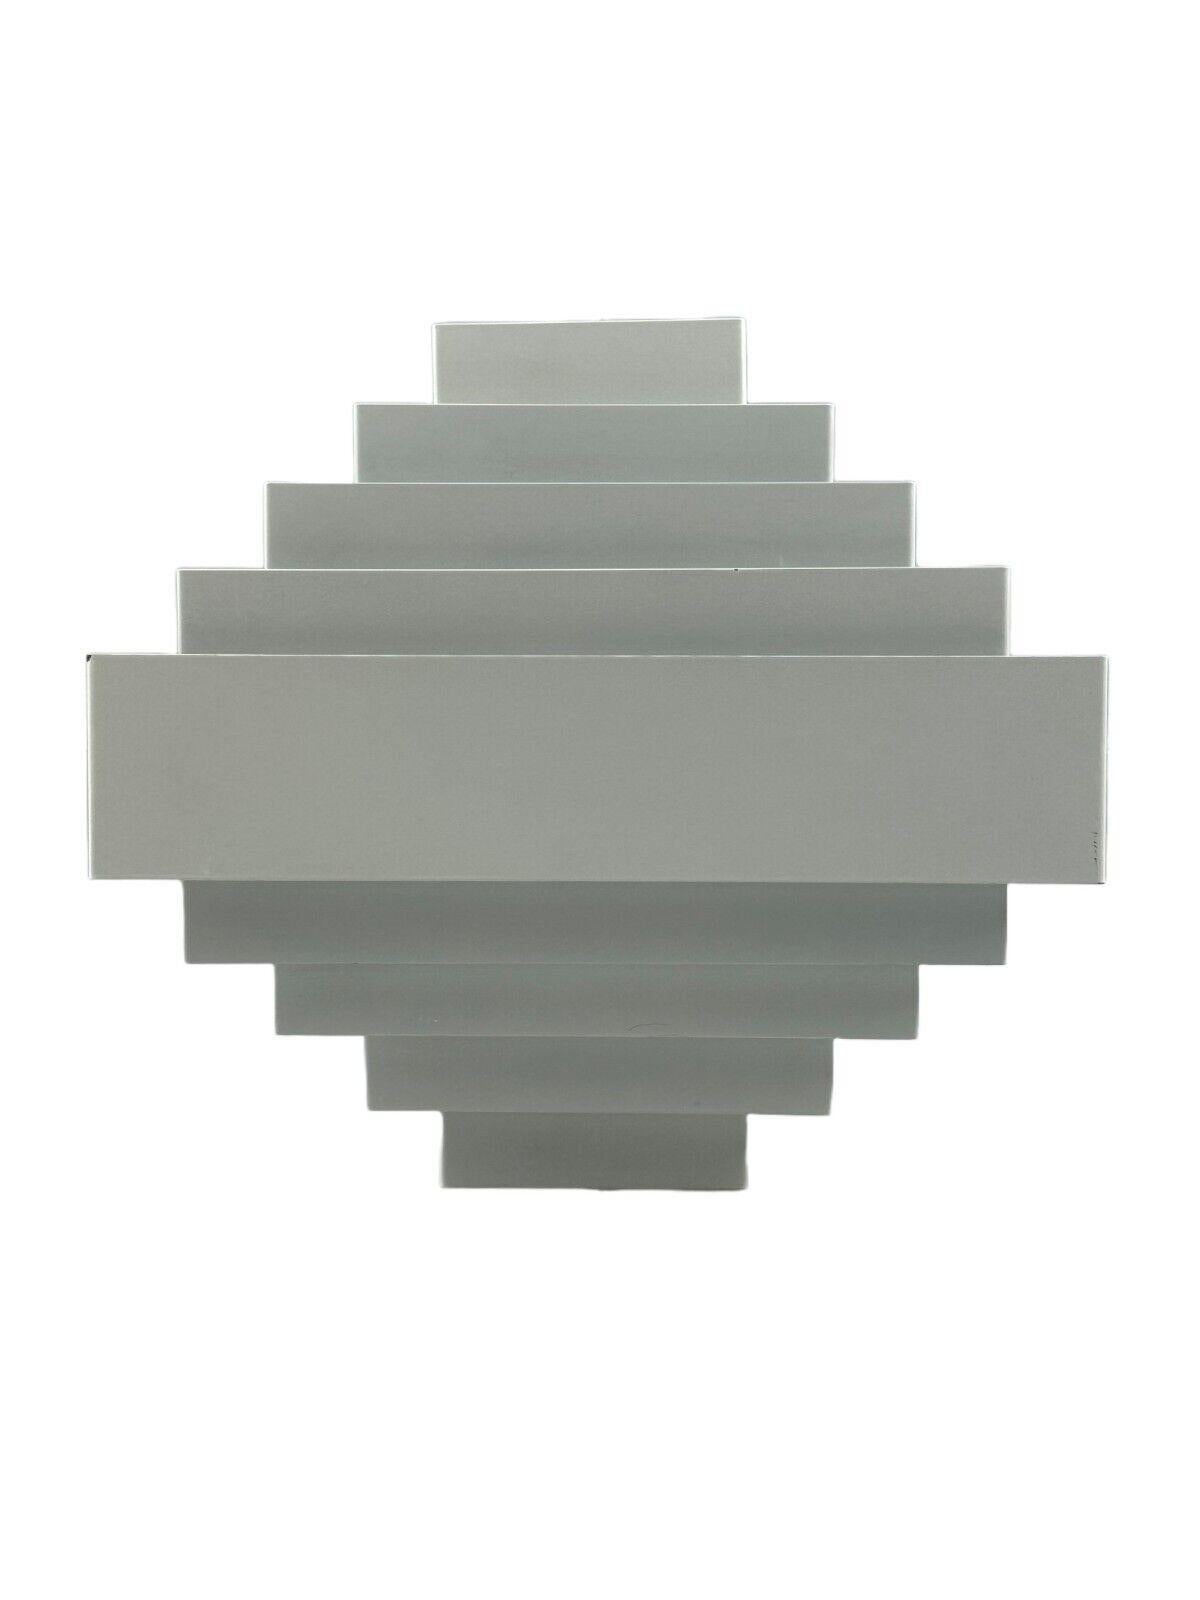 60s 70s wall lamp by Jules Wabbes, AB Madsen & E. Larsen in metal

Object: wall lamp

Manufacturer: Jules Wabbes

Condition: good - vintage

Age: around 1960-1970

Dimensions:

Width = 18cm
Depth = 12.5cm
Height = 17cm

Material: metal

Other